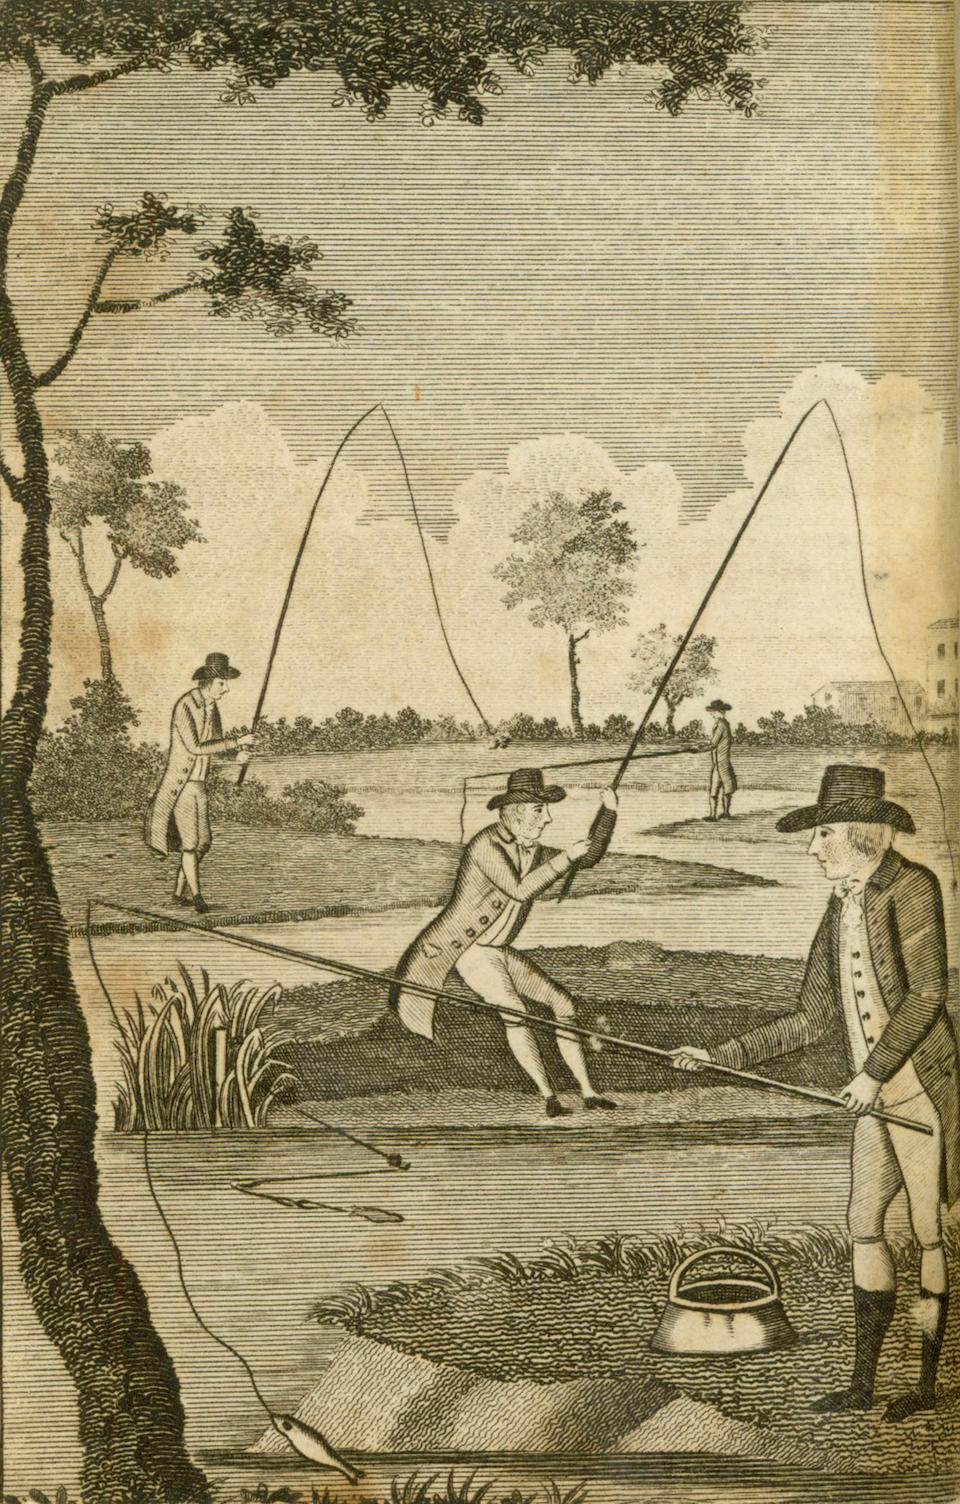 COLE (RALPH) The Young Angler's Pocket Companion, FIRST EDITION, 1795--The Gentleman Angler, 1726--MACKINTOSH (ALEXANDER) The Modern Fisher: or Driffield Angler, second edition, 1821 (3)